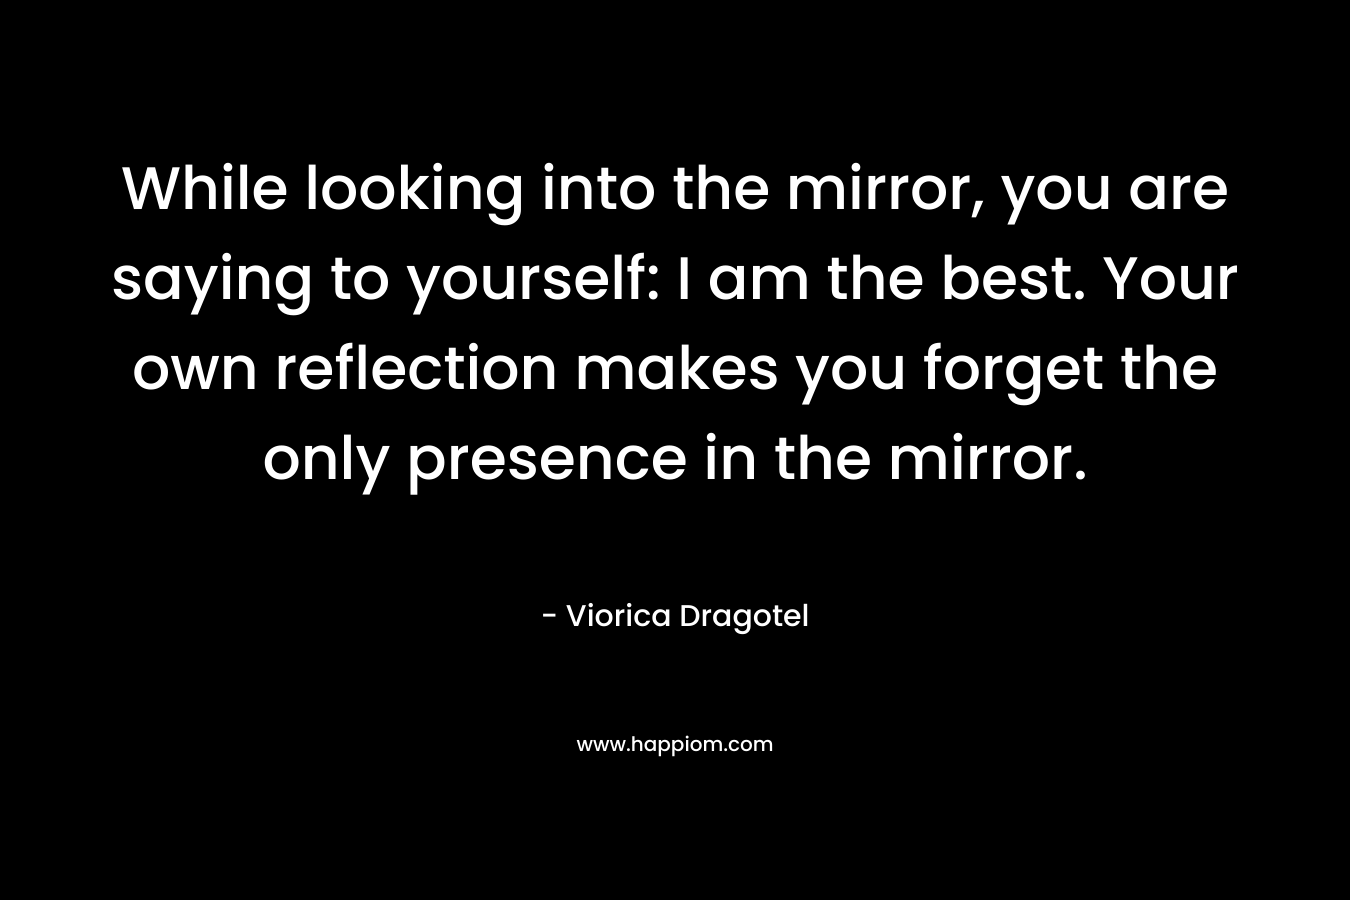 While looking into the mirror, you are saying to yourself: I am the best. Your own reflection makes you forget the only presence in the mirror.